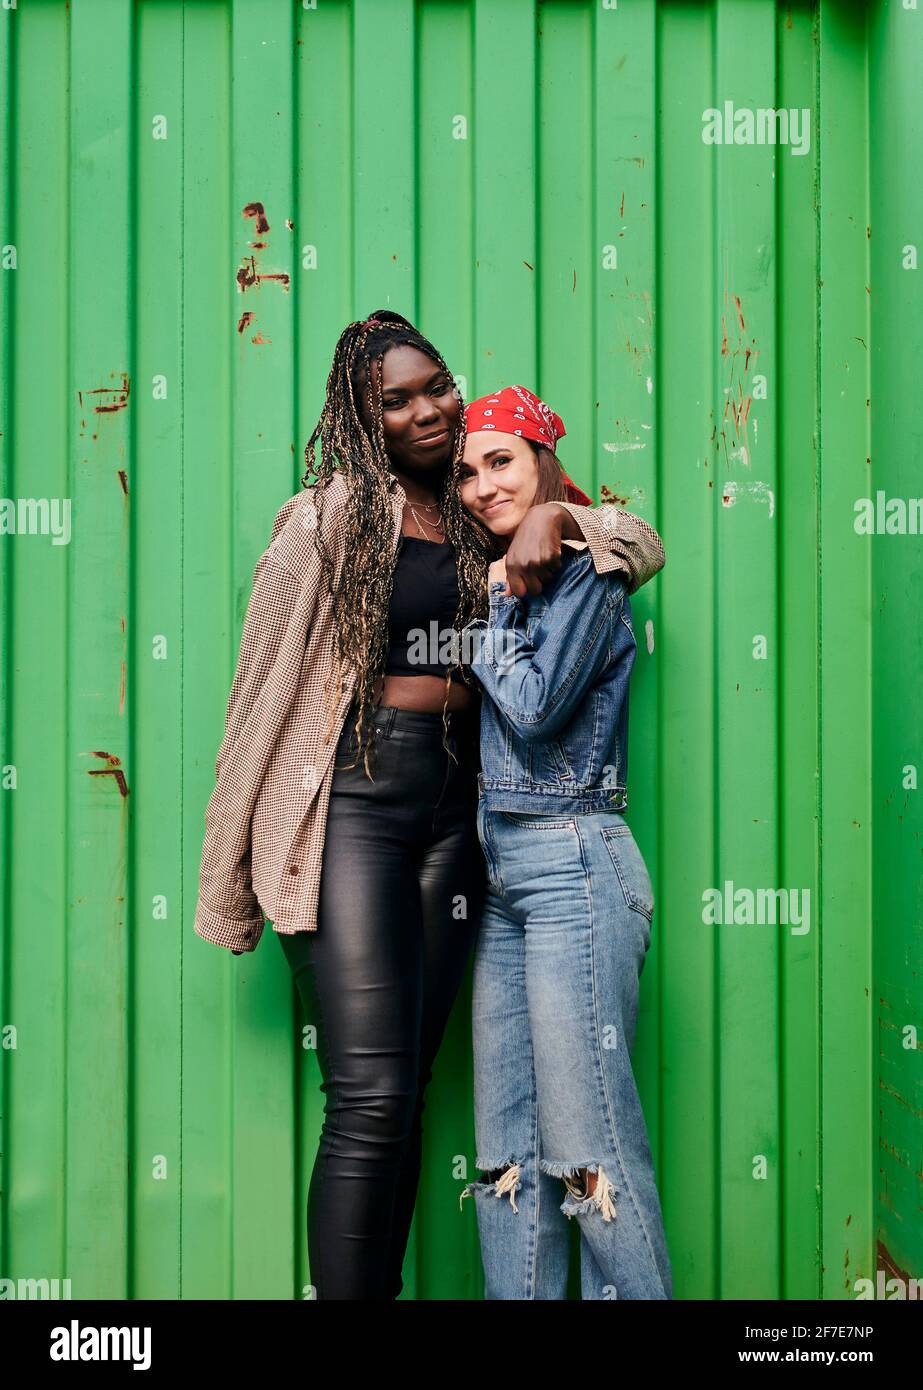 Two multi-ethnic women in urban clothing smile and hug each other Stock Photo